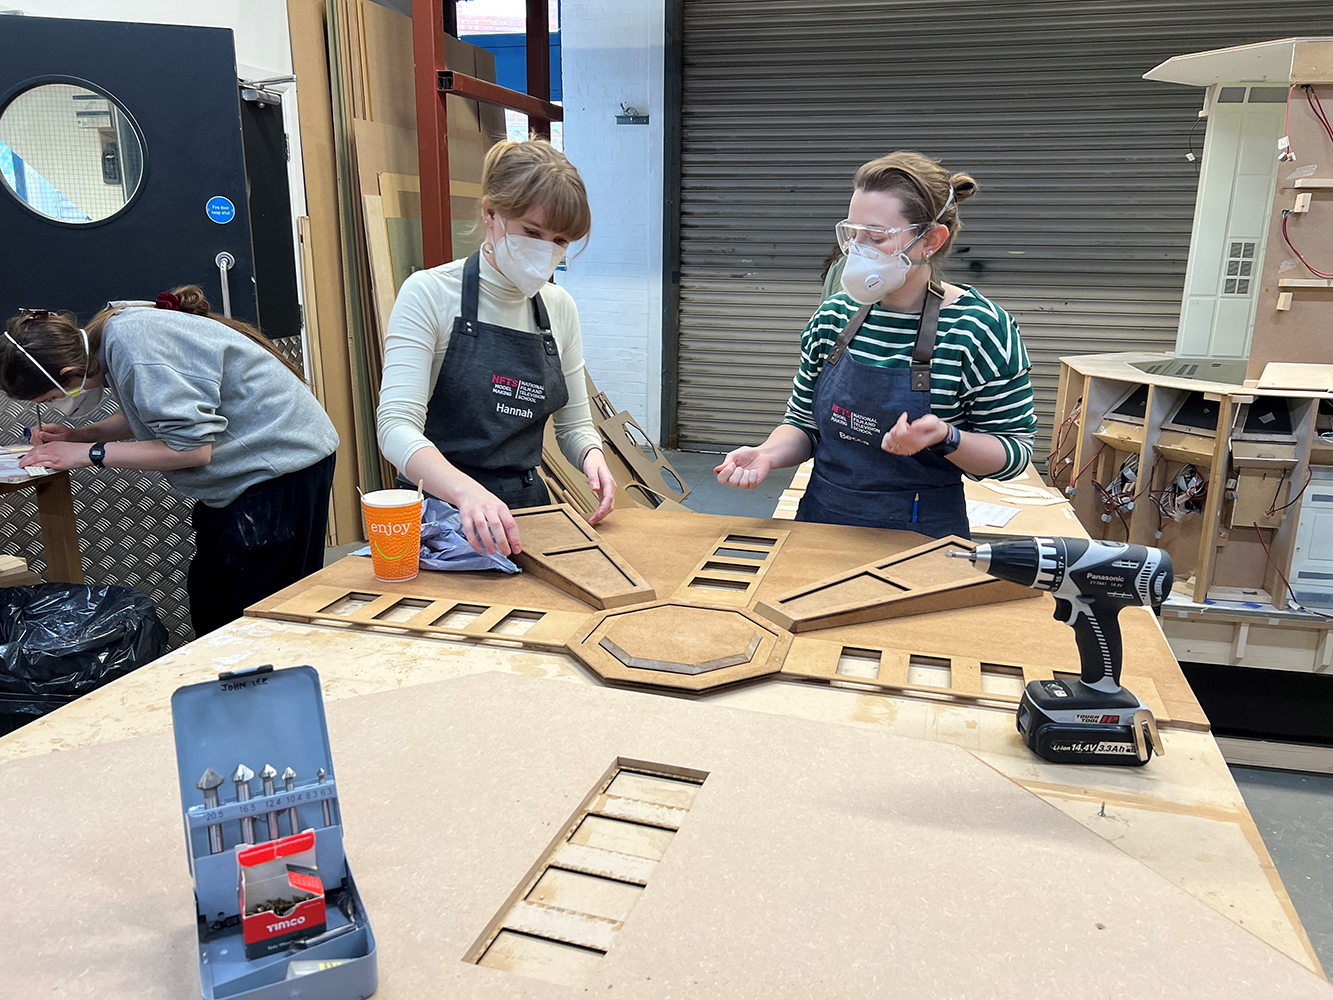 Model making students working on the ceiling piece, which was split in two for camera and lighting access.